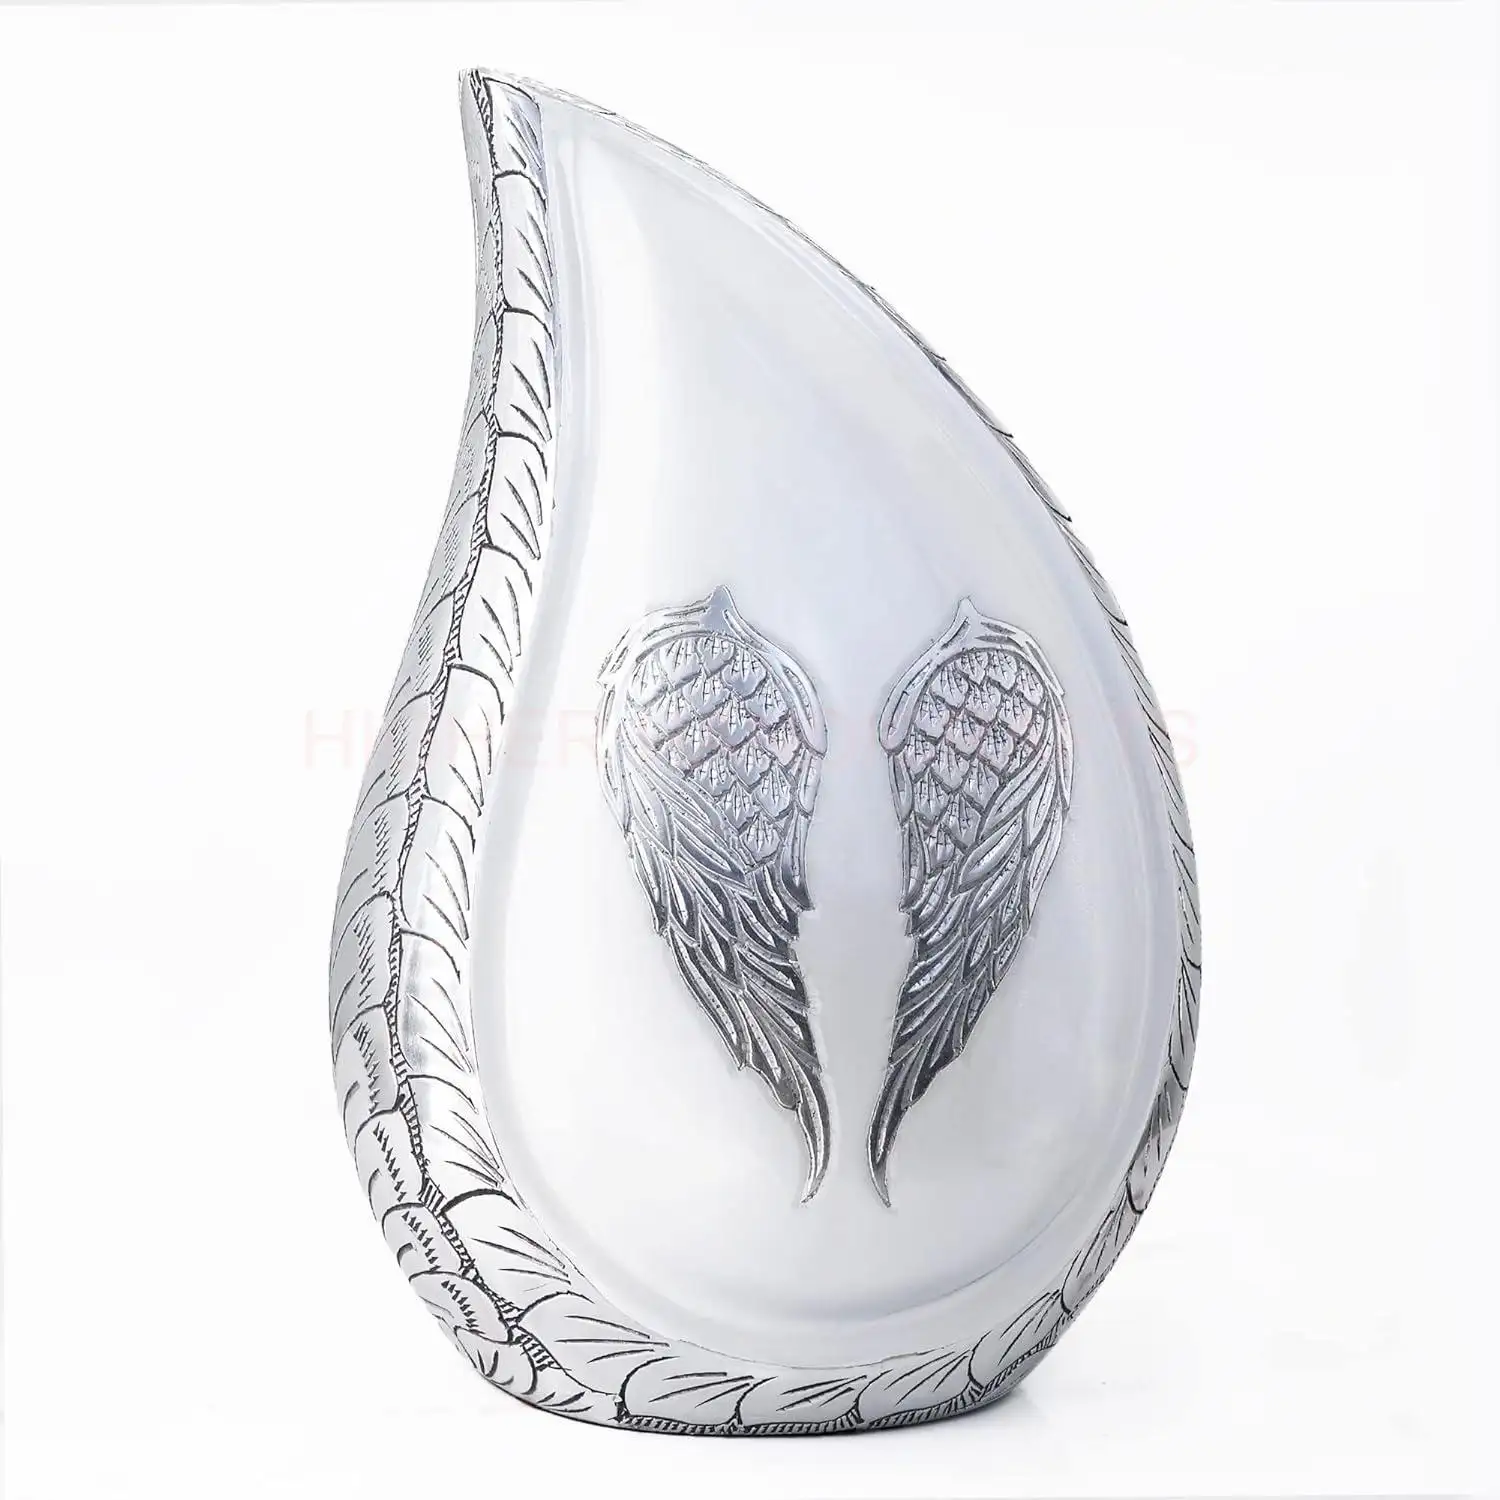 Teardrop Decorative Urns Funeral Cremation Urns Ashes Display at Home at Columbarium, Engraved Aluminium Urns for Ashes Adul